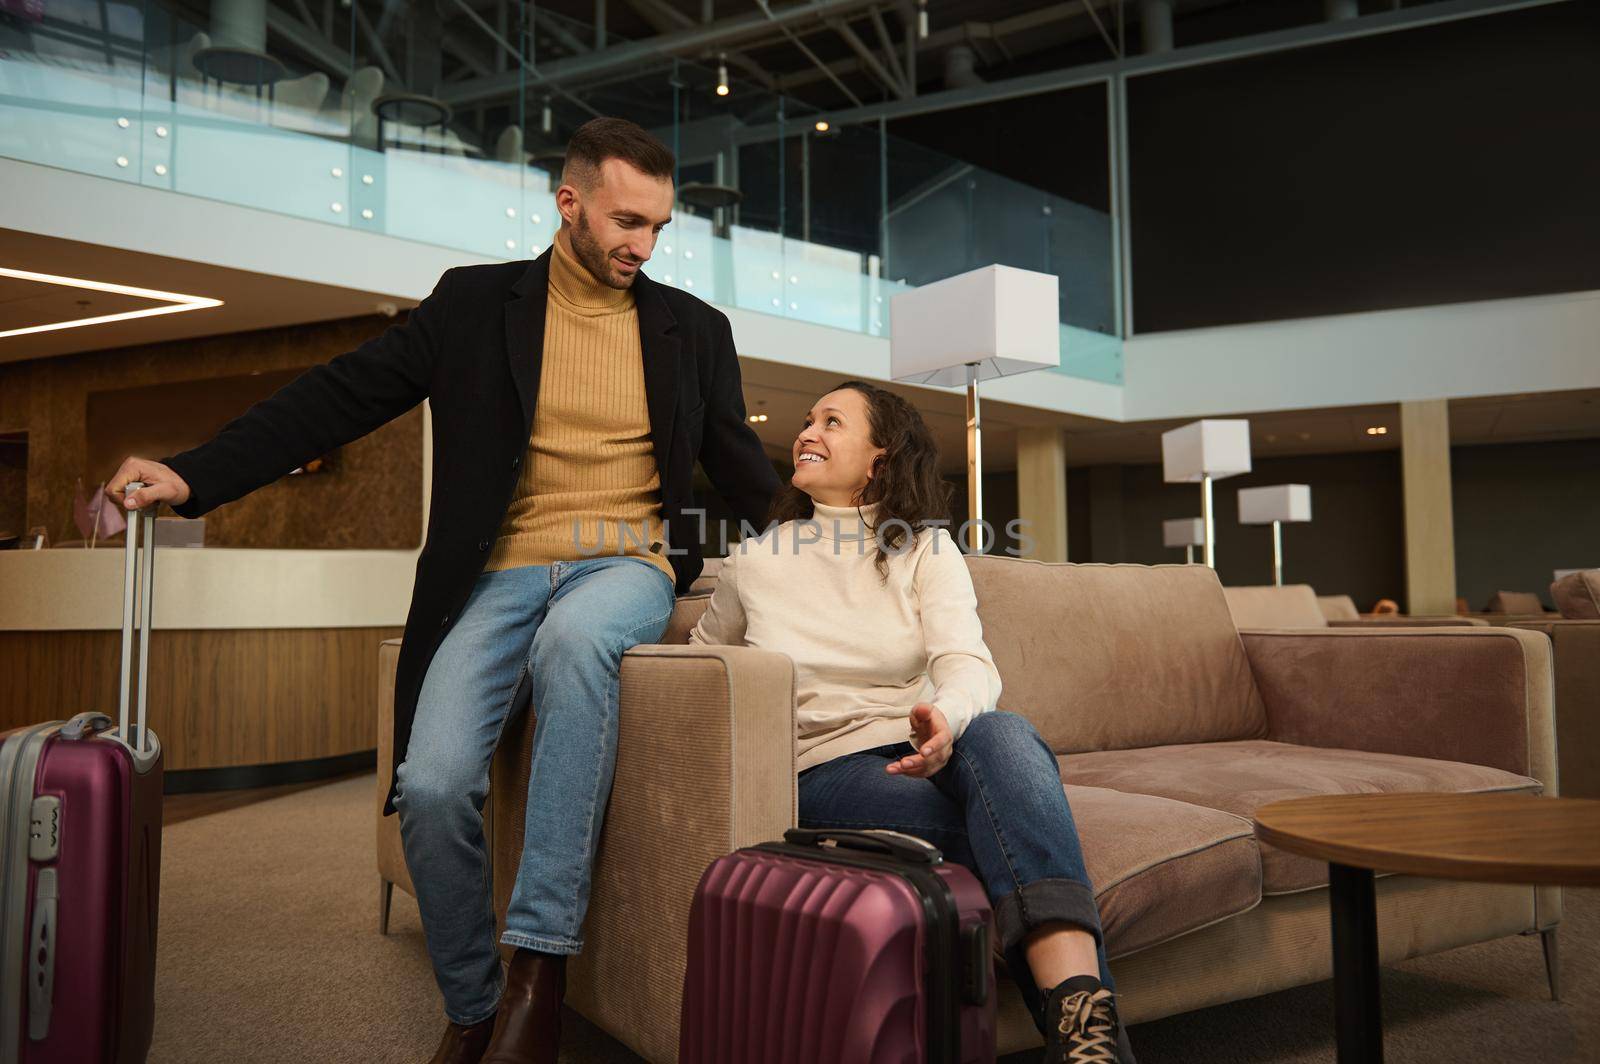 Woman and man in casual clothes with suitcases sitting on armchair in the international airport terminal lounge, looking at each other, discussing forthcoming flight, waiting for airplane departure by artgf